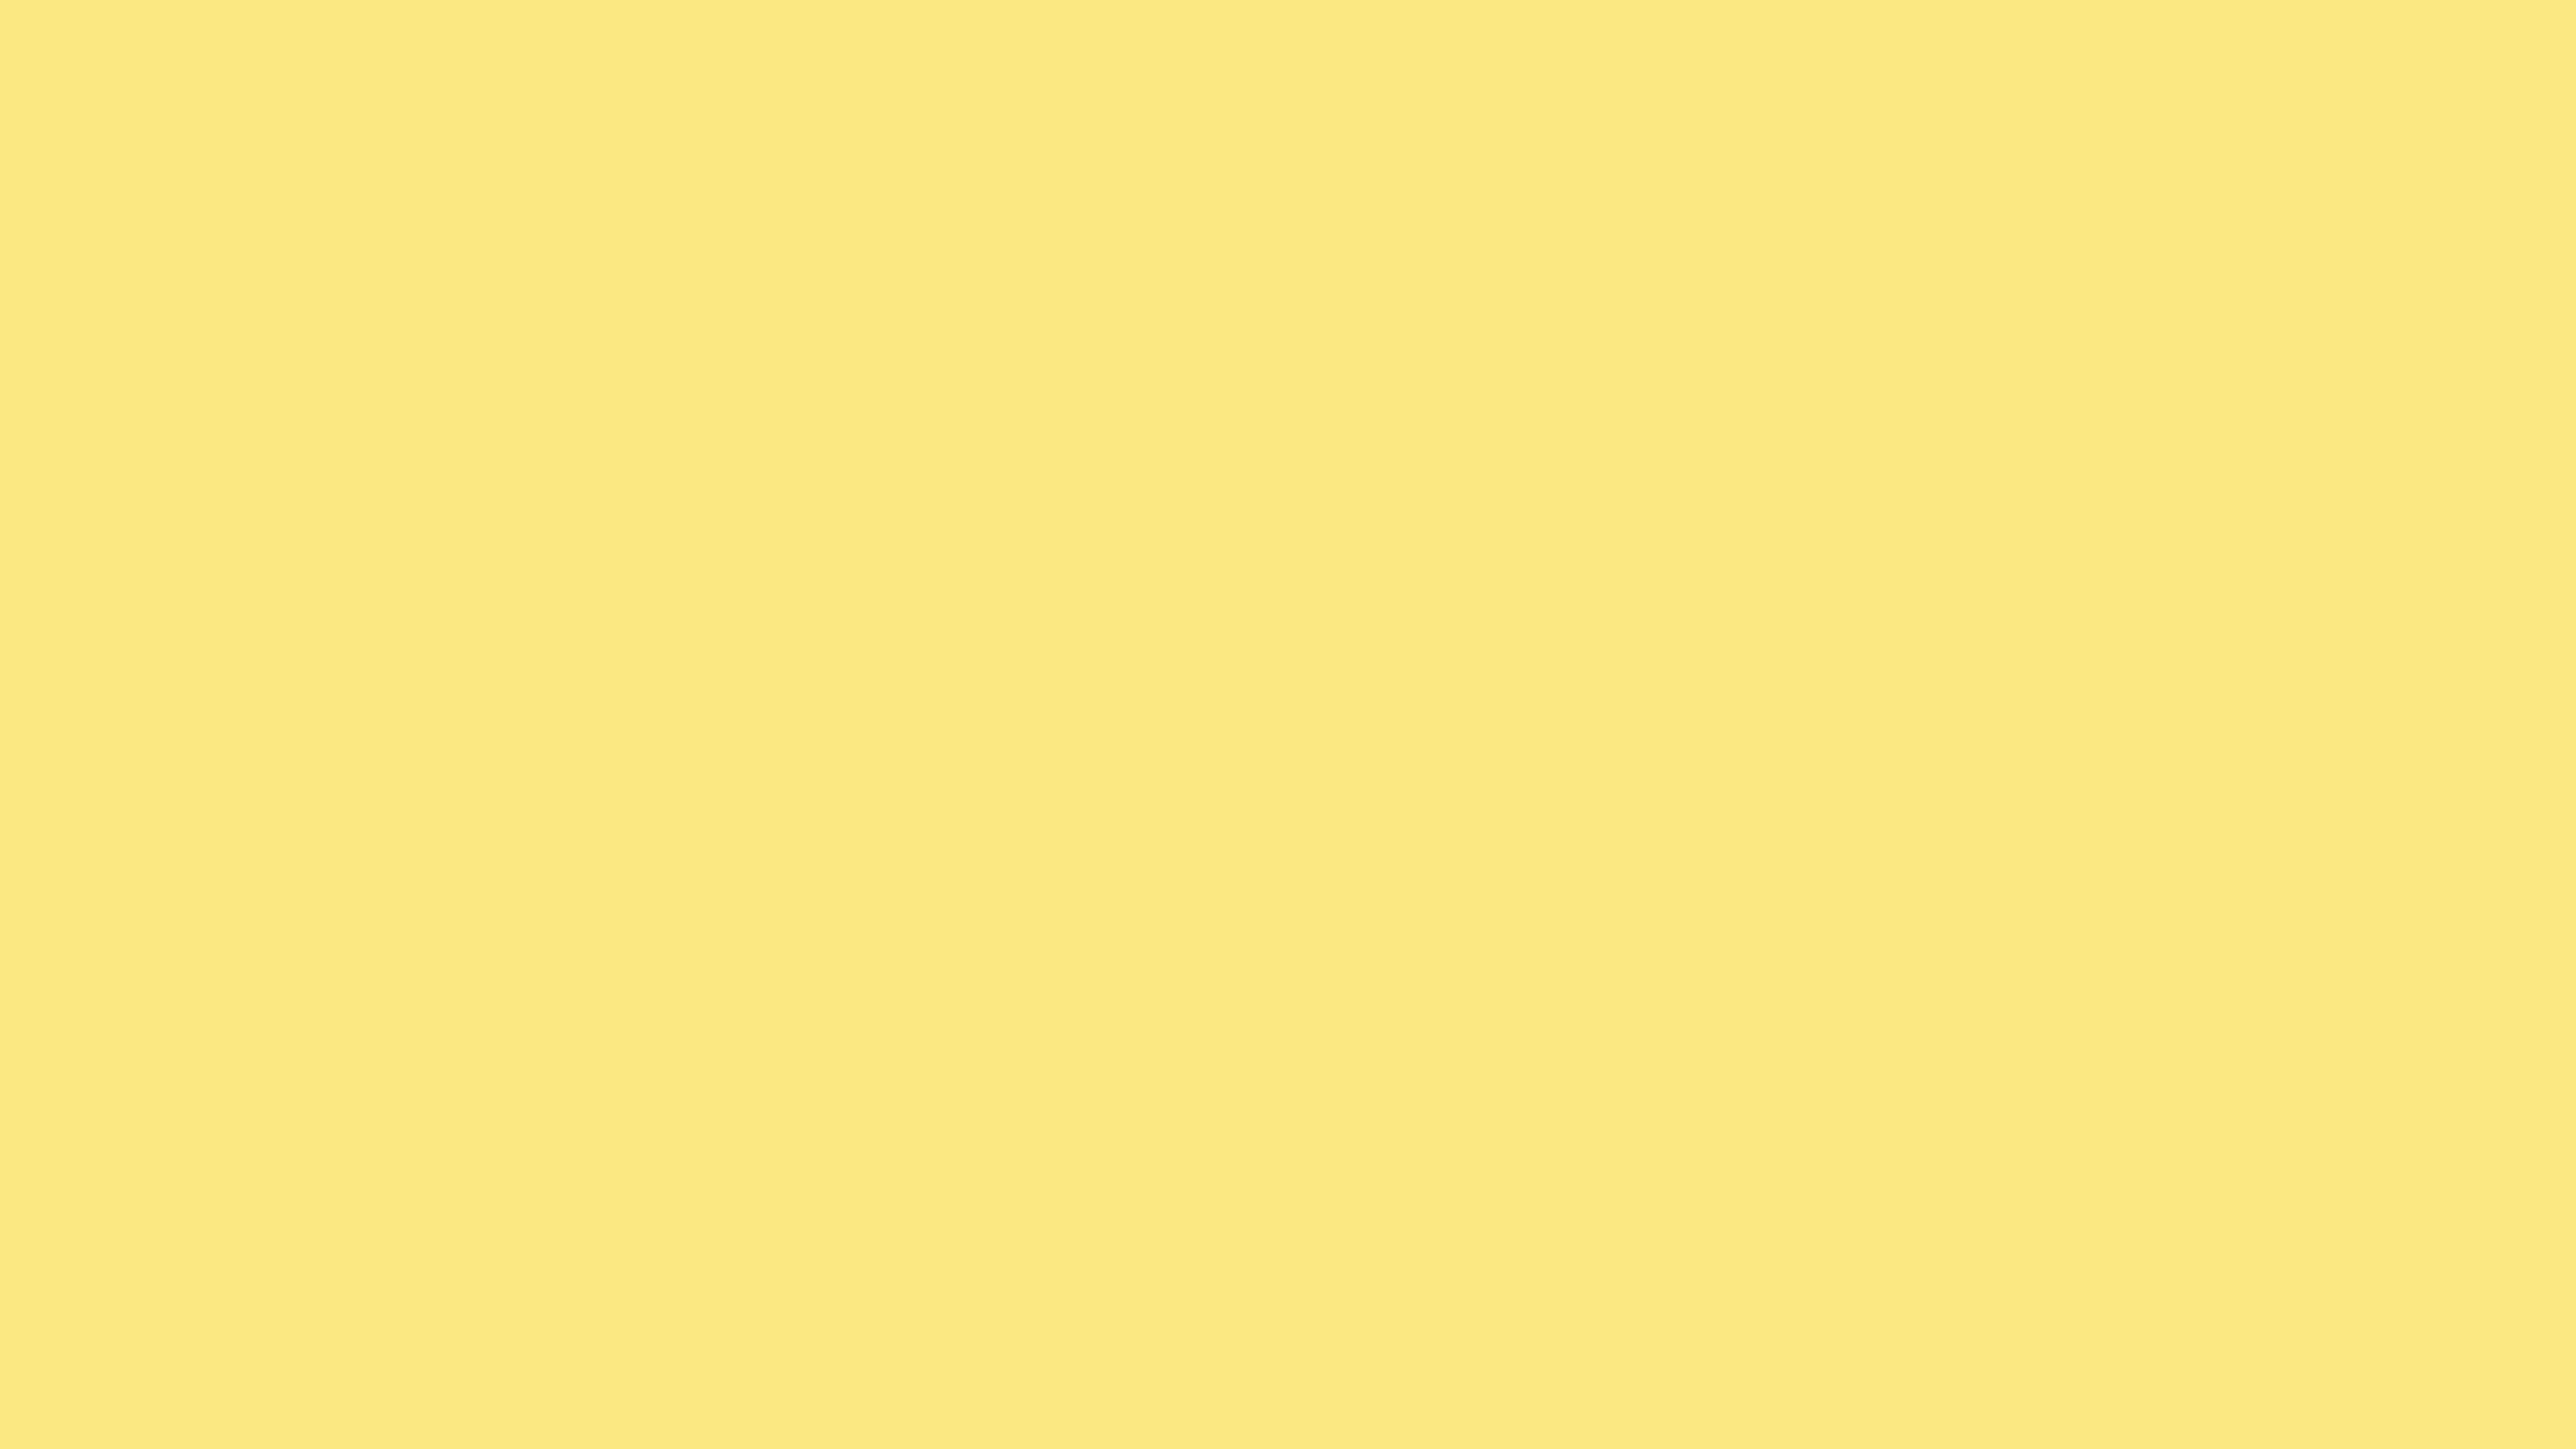 5120x2880 Yellow Crayola Solid Color Background